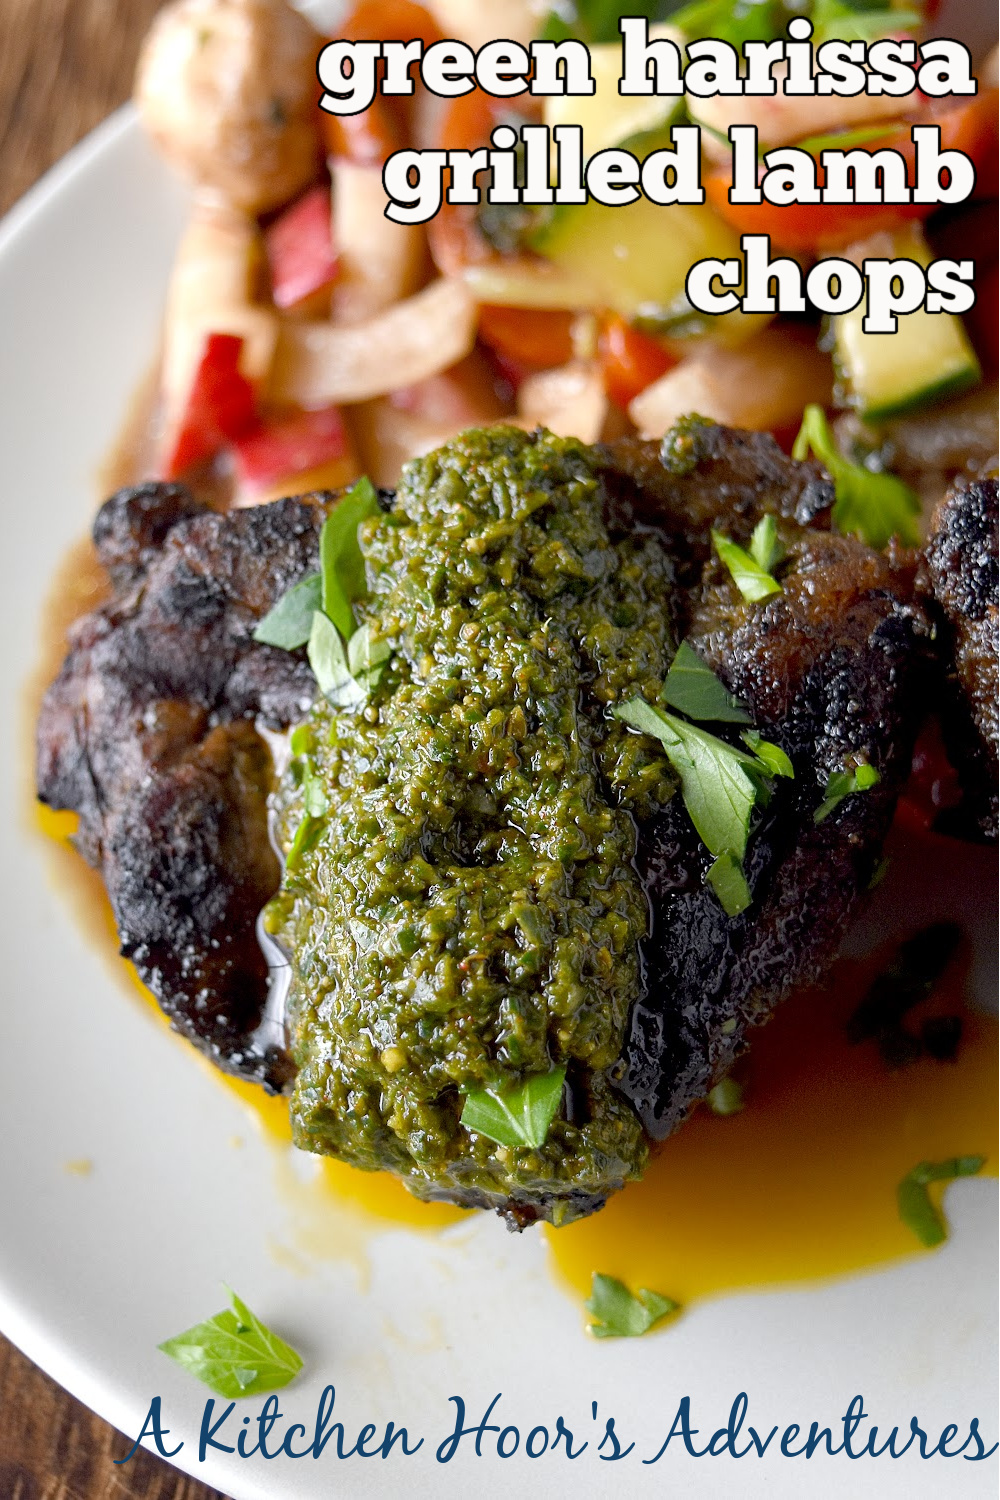 Green Harissa Grilled Lamb Chops have an herb filled delicious sauce with a kick on top of perfectly grilled lamb chops. This green harissa contains spinach, parsley, mint, and oregano and no cilantro. #HerbWeek #greenharissa #grilledlamb #spicysauce #freshherbs
